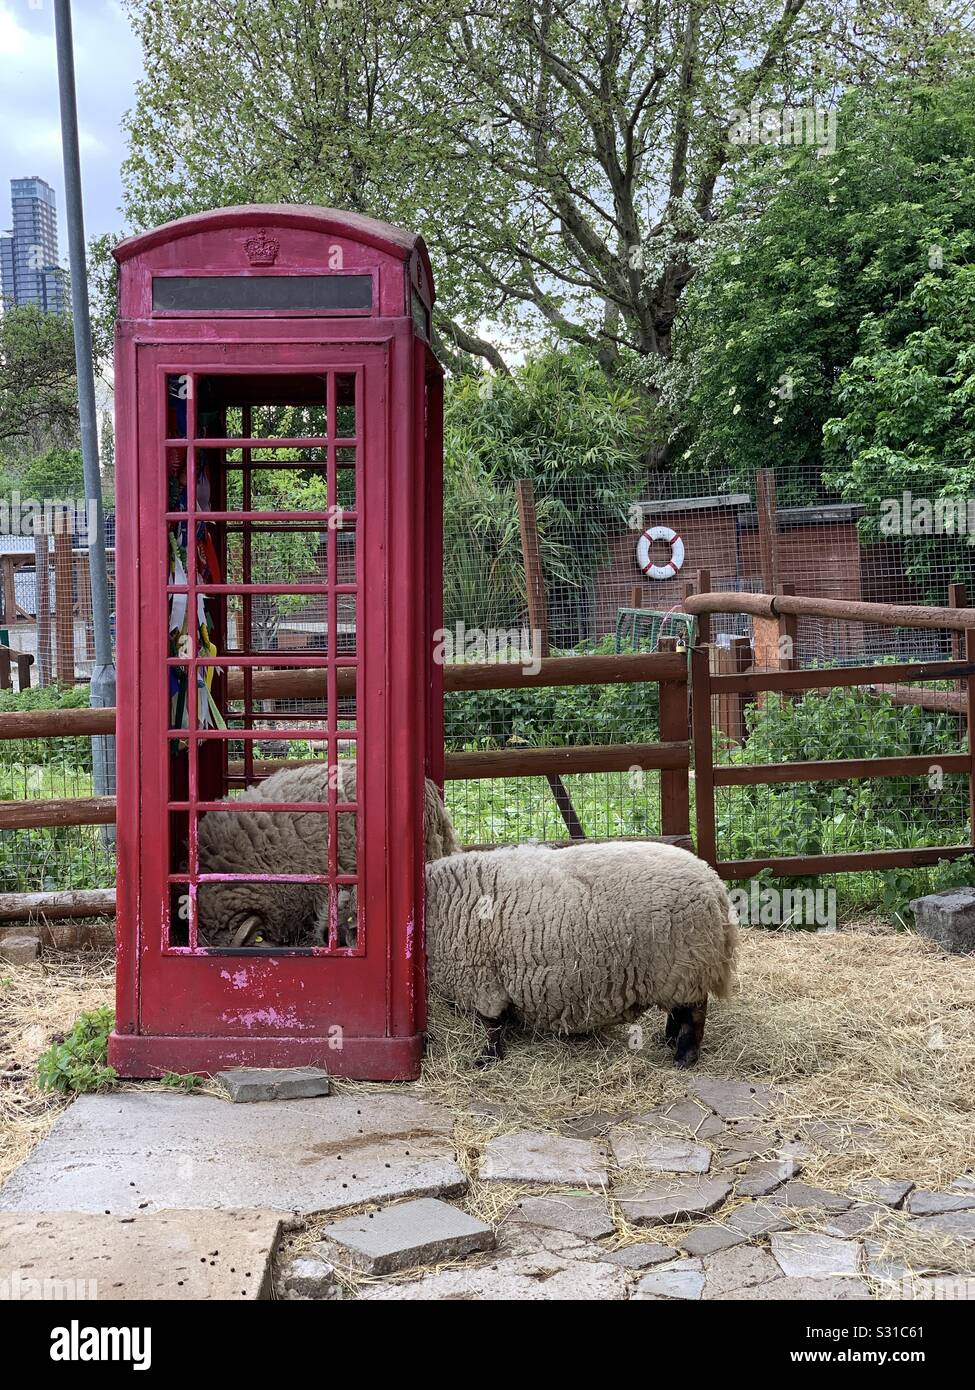 Sheep in red phone box Stock Photo